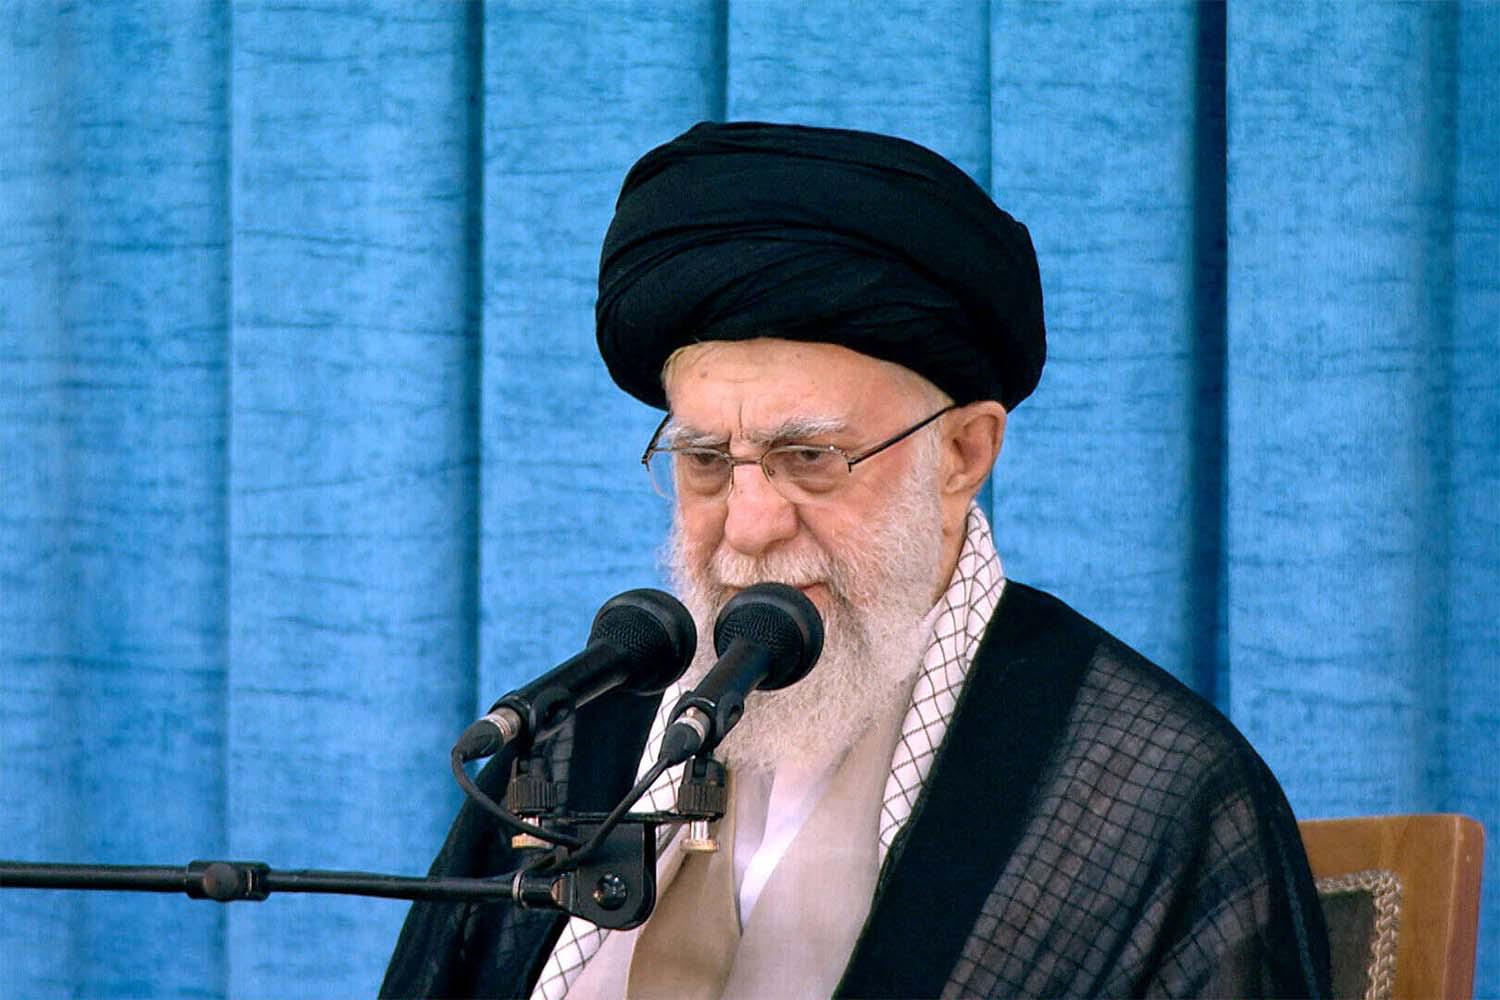 The looming succession to Khamenei is the overriding concern among Iran's clerical elite